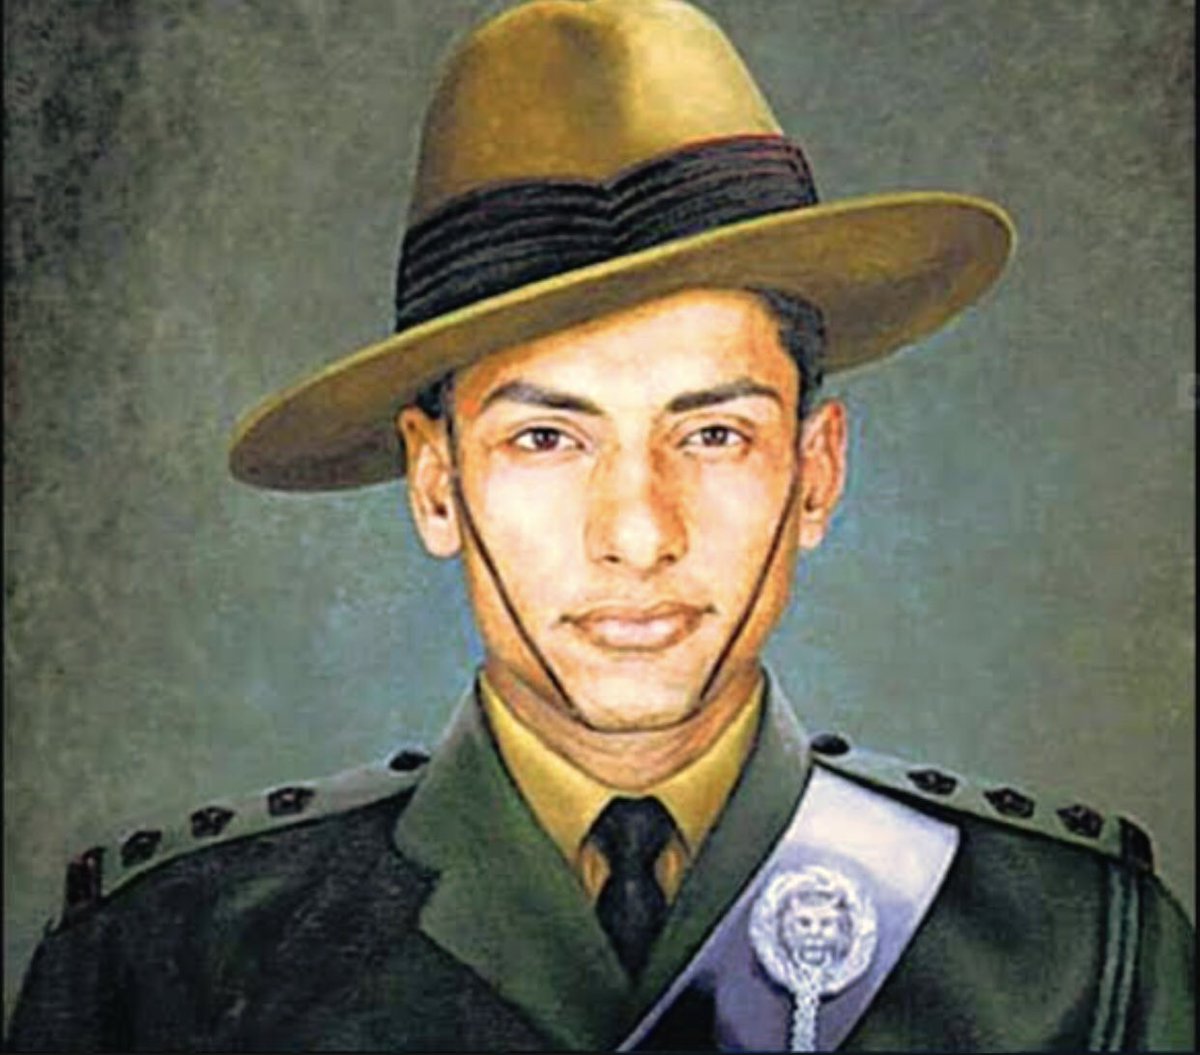 “वक़्त आने पर मृत्यु को भी जीत लूँगा।”(When the time comes, I will win over death too.)Capt Manoj Kumar Pandey had once noted in his diary when he was studying in Sainik School. He always had his eyes on the PVC. He entered the Indian Army for it and also laid his life for it.